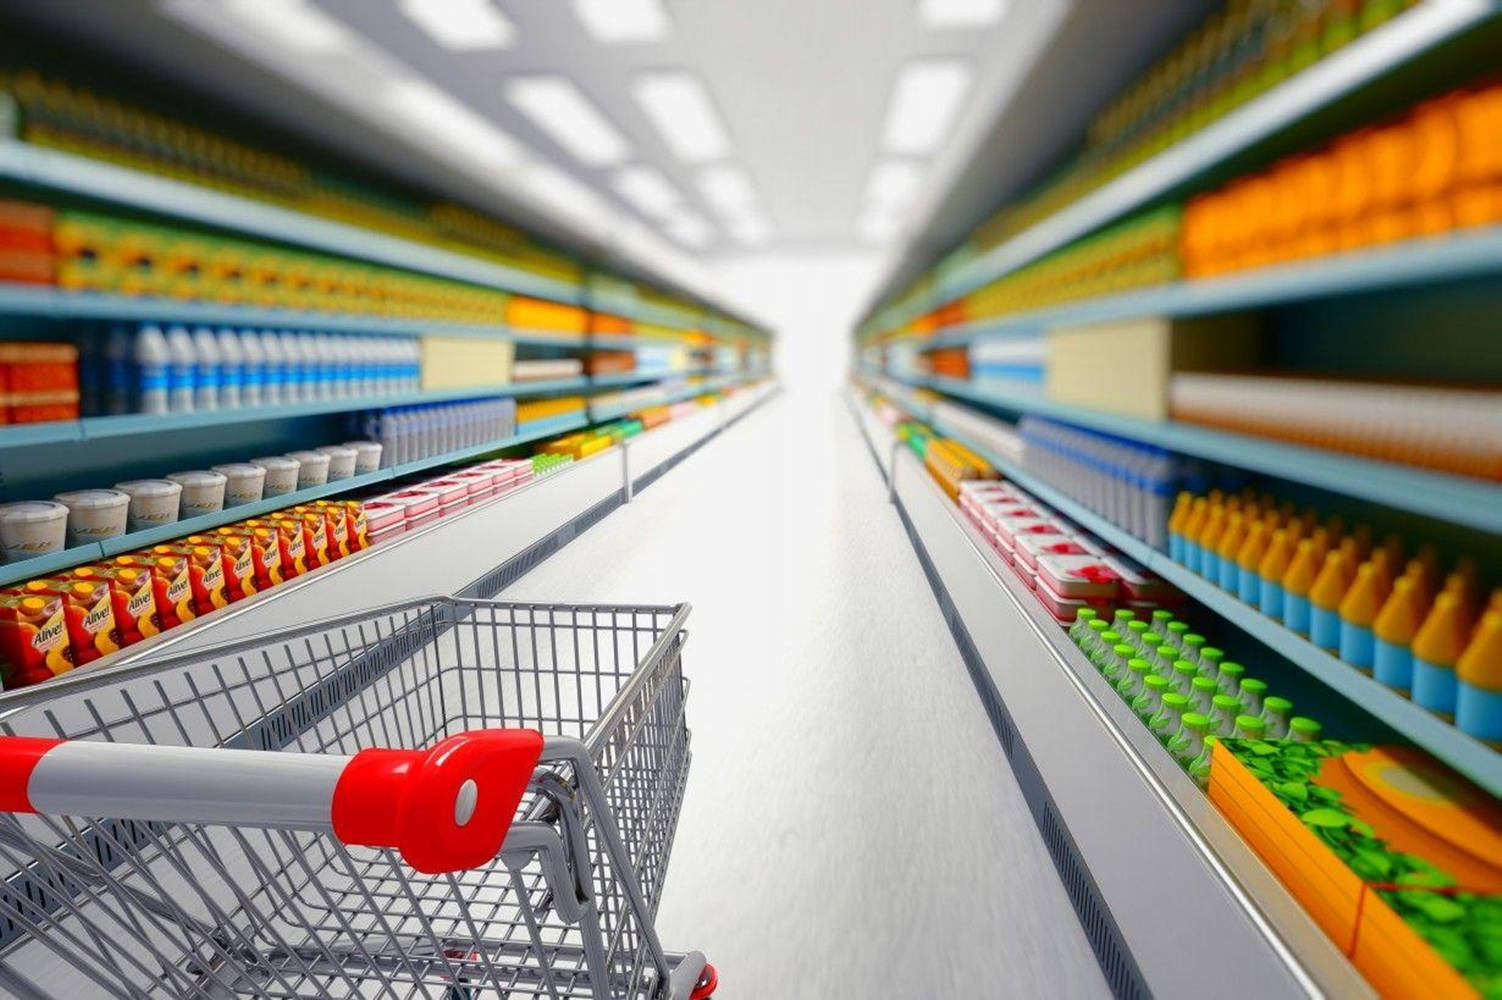 Smartly Organized Grocery Shopping Cart Background